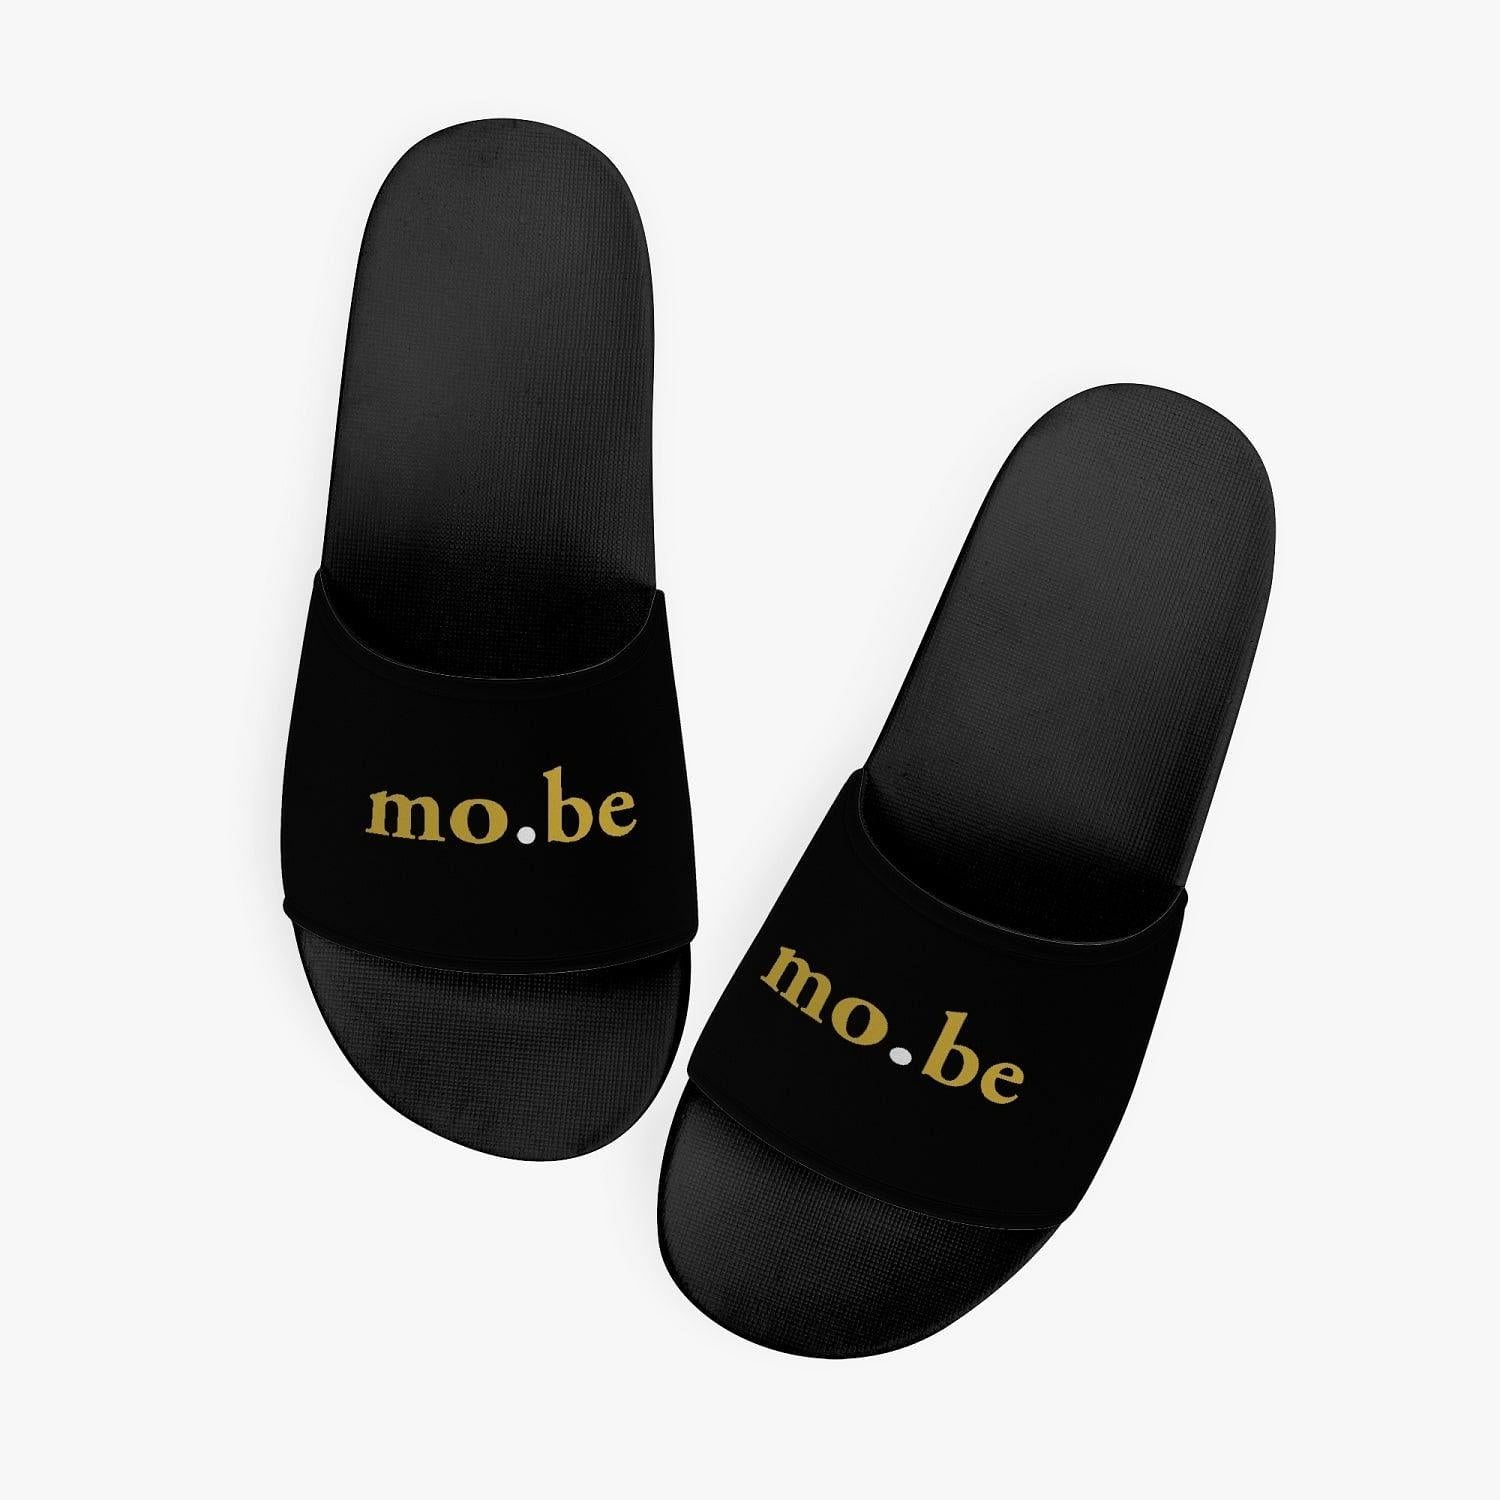 mo.be sandals - mo.be